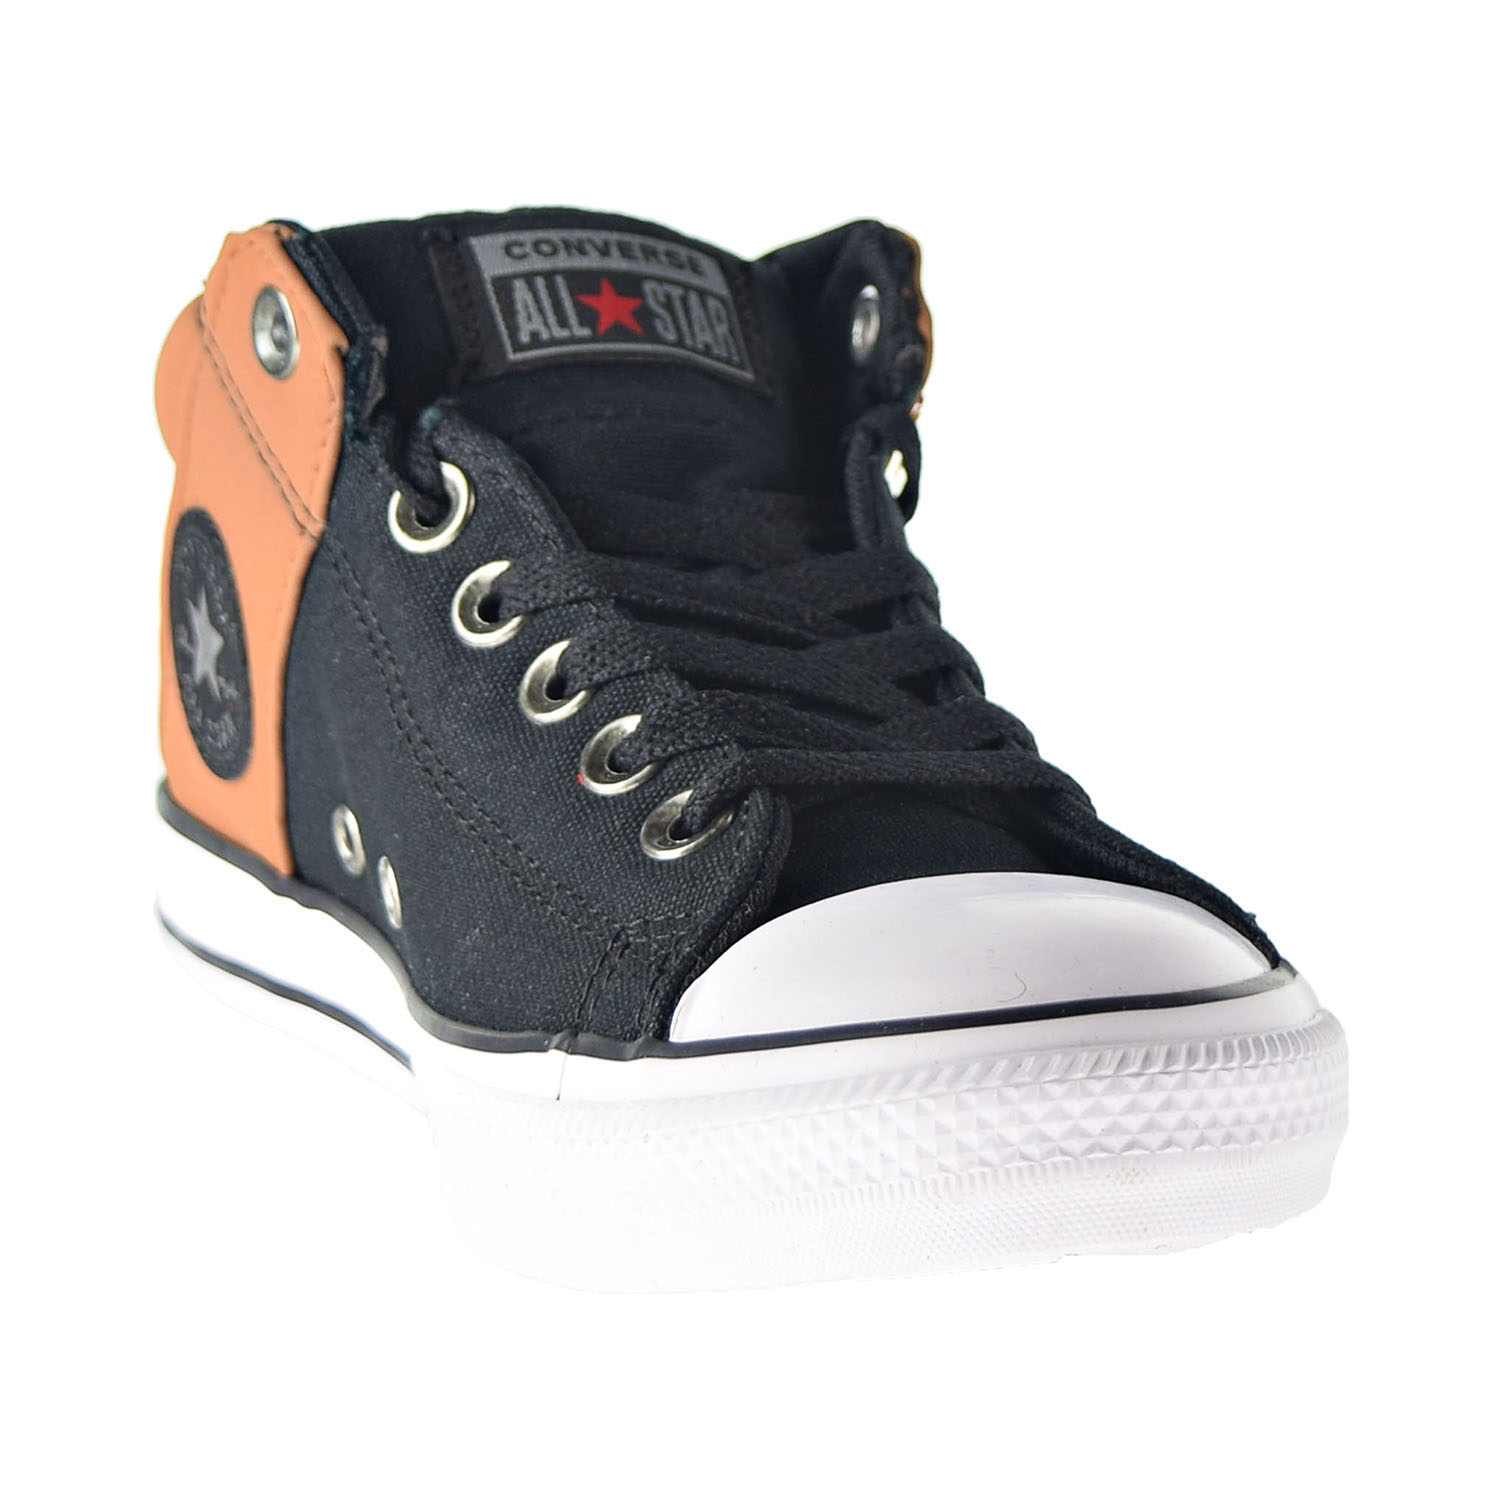 Converse Chuck Taylor All Star Axel Mid Kids' Shoes Black-Warm Tan-White 666065f - image 2 of 6